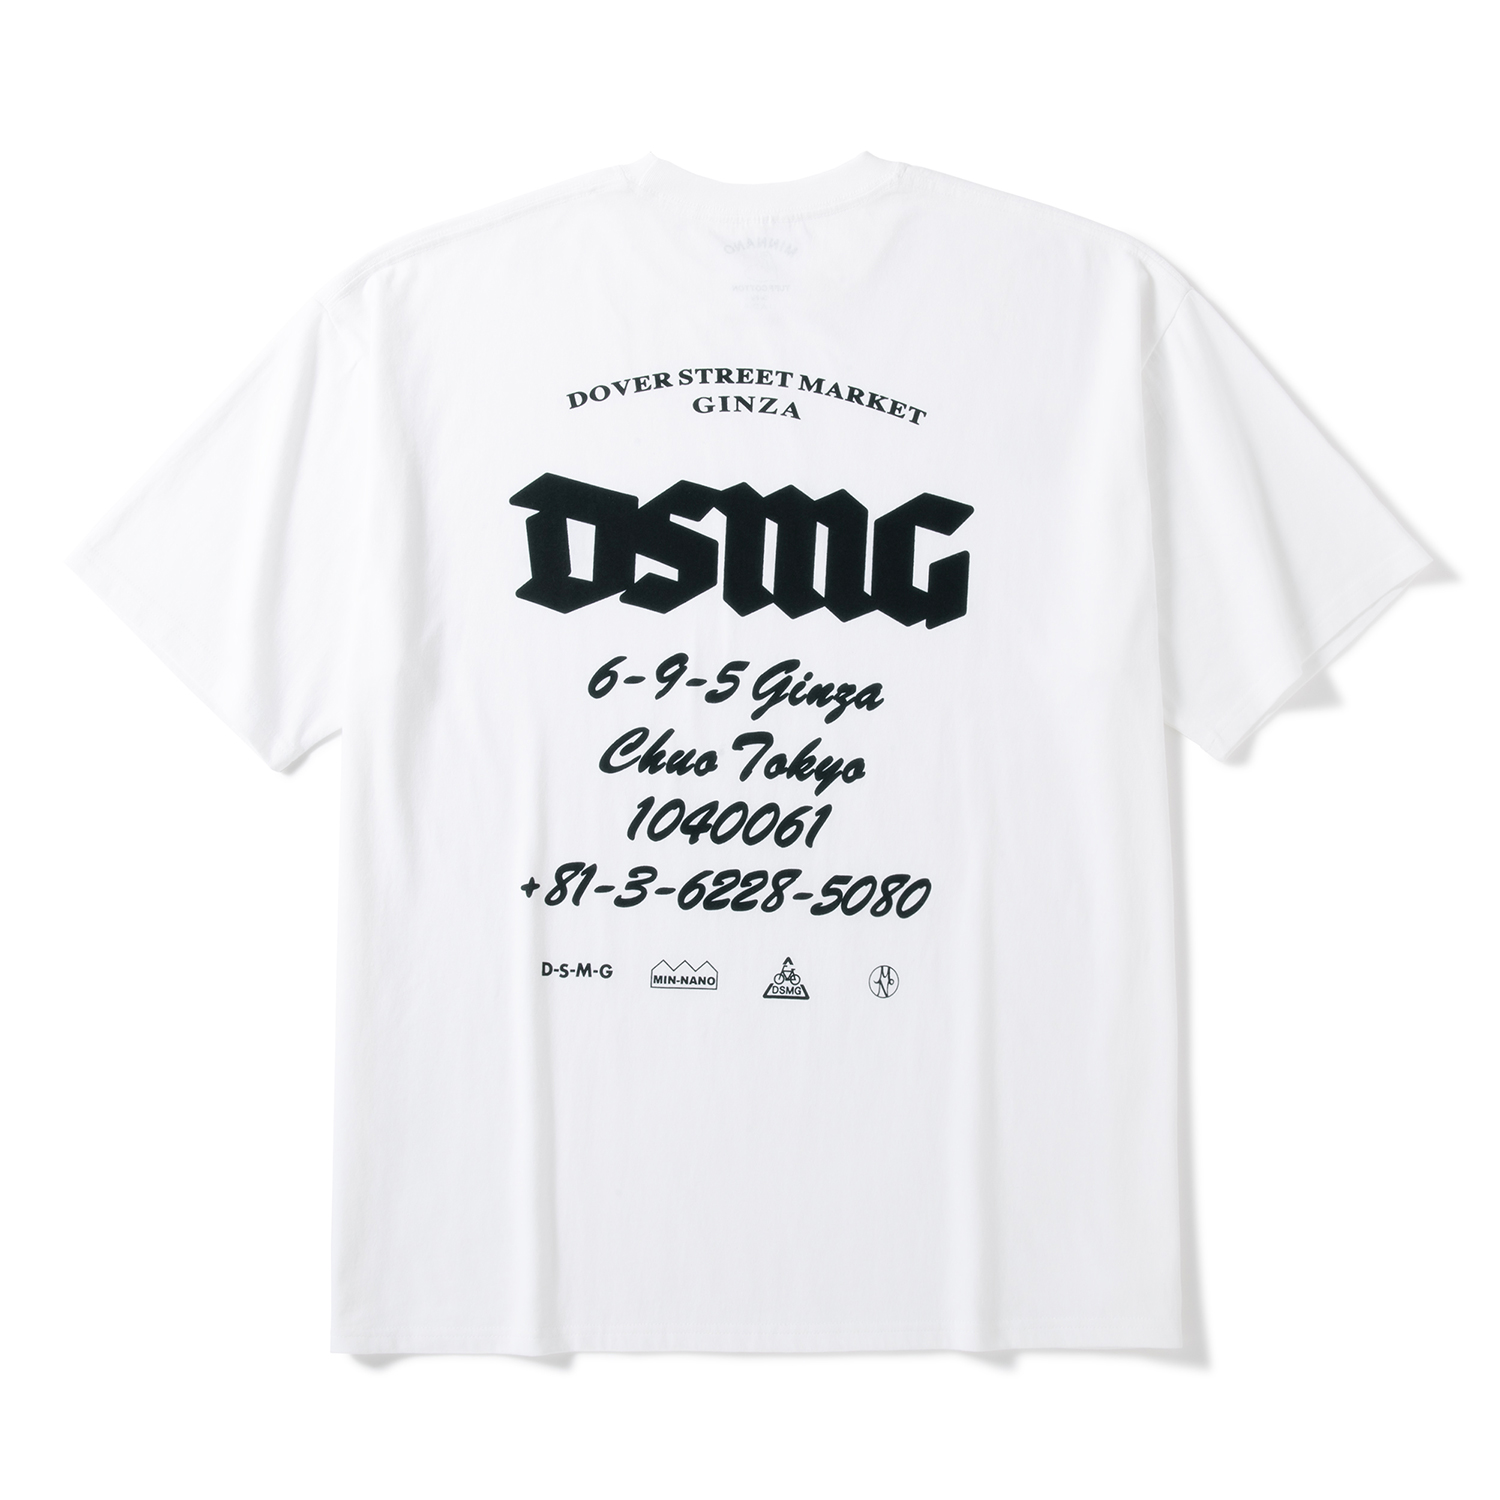 MIN-NANO for DOVER STREET MARKET GINZAのニューアイテムが10月7日に